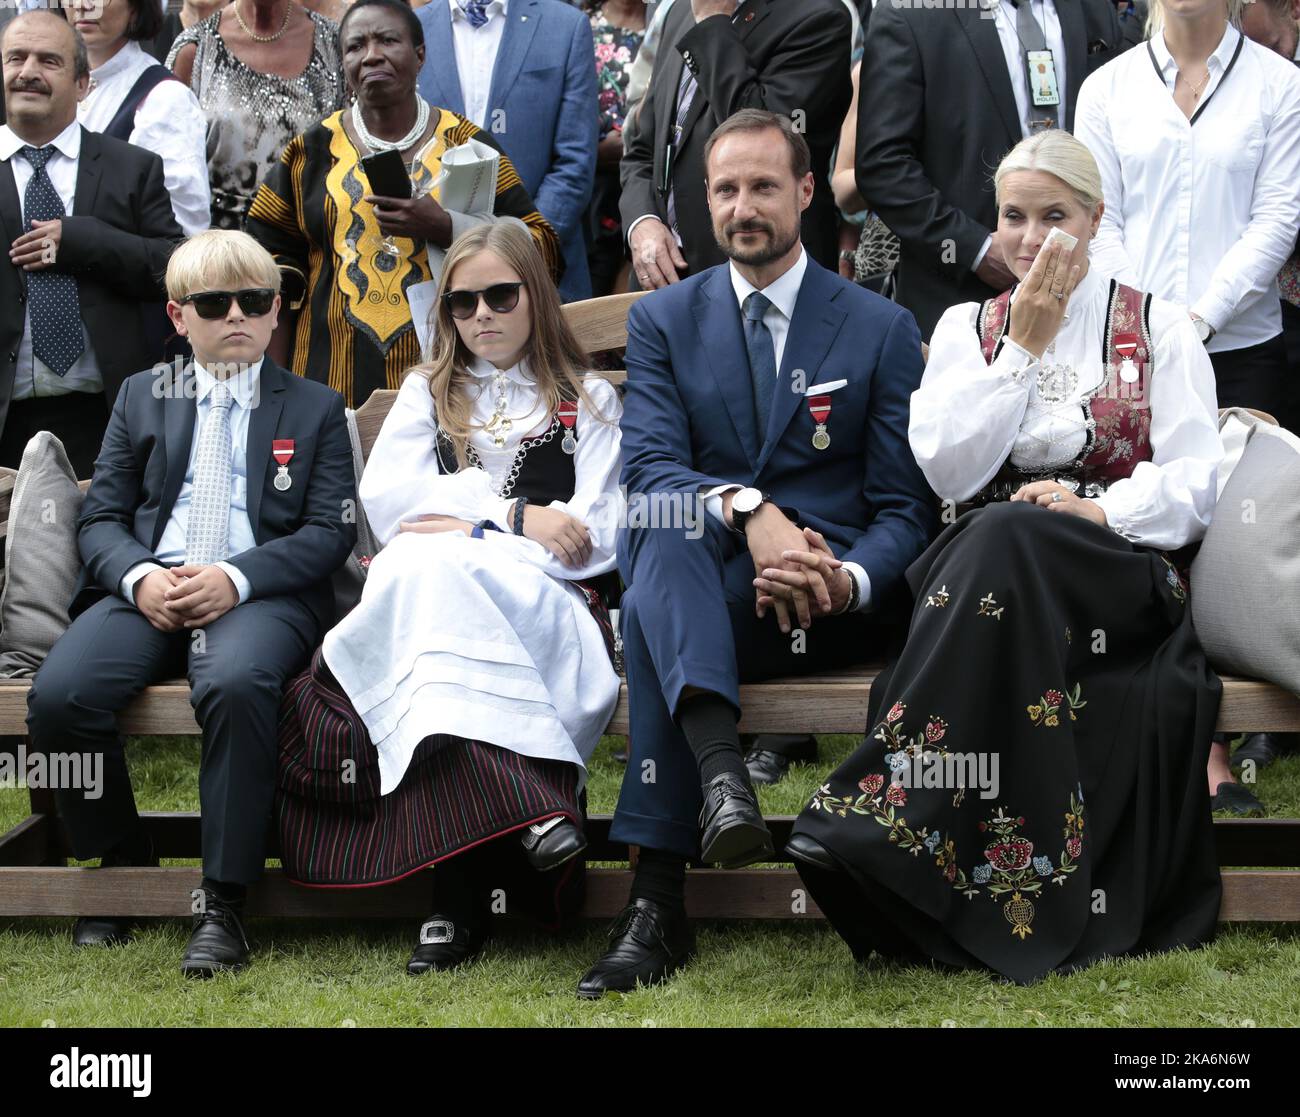 Oslo, Norway 20160901. Their Majesties The King and Queen host a garden party for 1 500 guests in the Palace Park. Princess Mette-Marit crying during the garden party. From left: Prince Sverre Magnus, Princess Ingrid Alexandra, Crown Prins Haakon and Crown Princess Mette-Marit Photo: Lise Aserud / NTB scanpix [LANUAGESEPARATOR] Oslo 20160901. Kronprinsesse Mette-Marit grater under hageselskapet. Kong Harald og dronning Sonja inviterer til hageselskap i Dronningparken. Kronprins Haakon, kronprinsesse Mette-Marit, prinsesse Ingrid Alexandra, prins Sverre Magnus og prinsesses Astrid deltar ogsa  Stock Photo